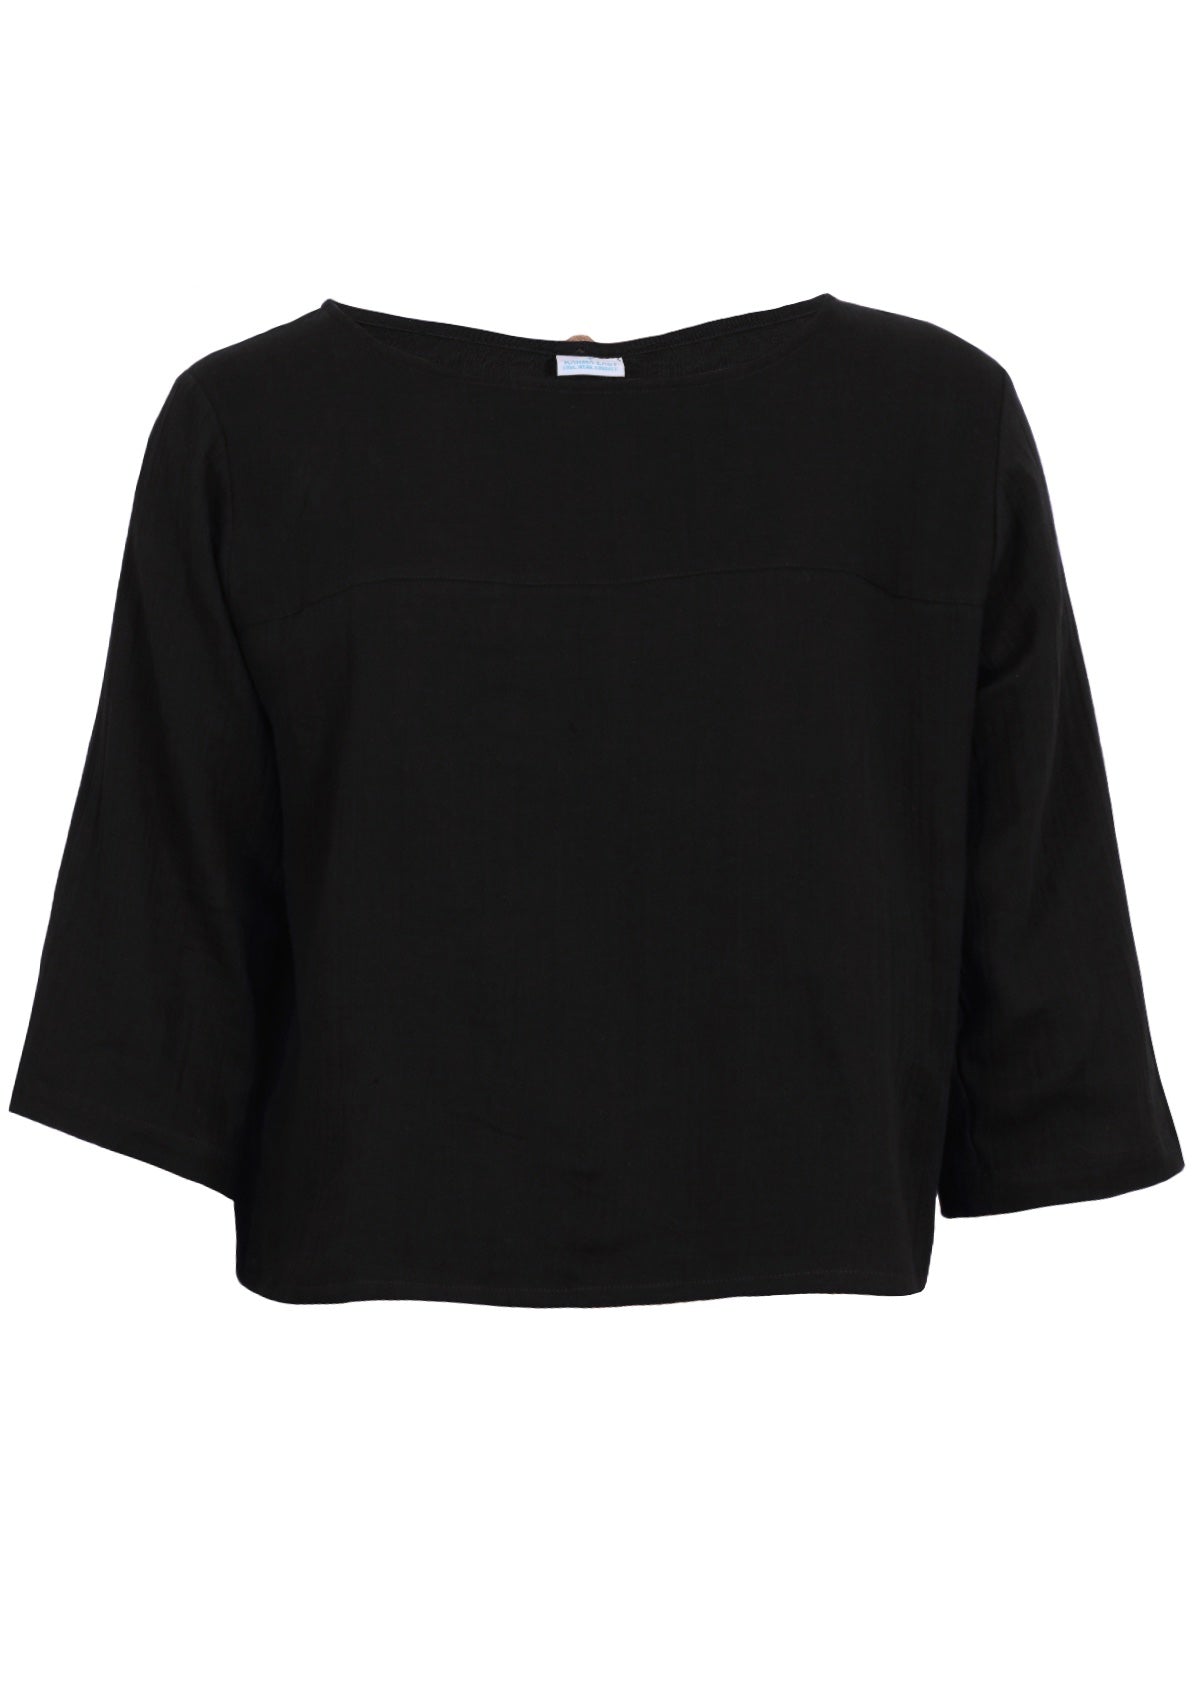 Black double cotton top with high round neckline and 3/4 sleeves